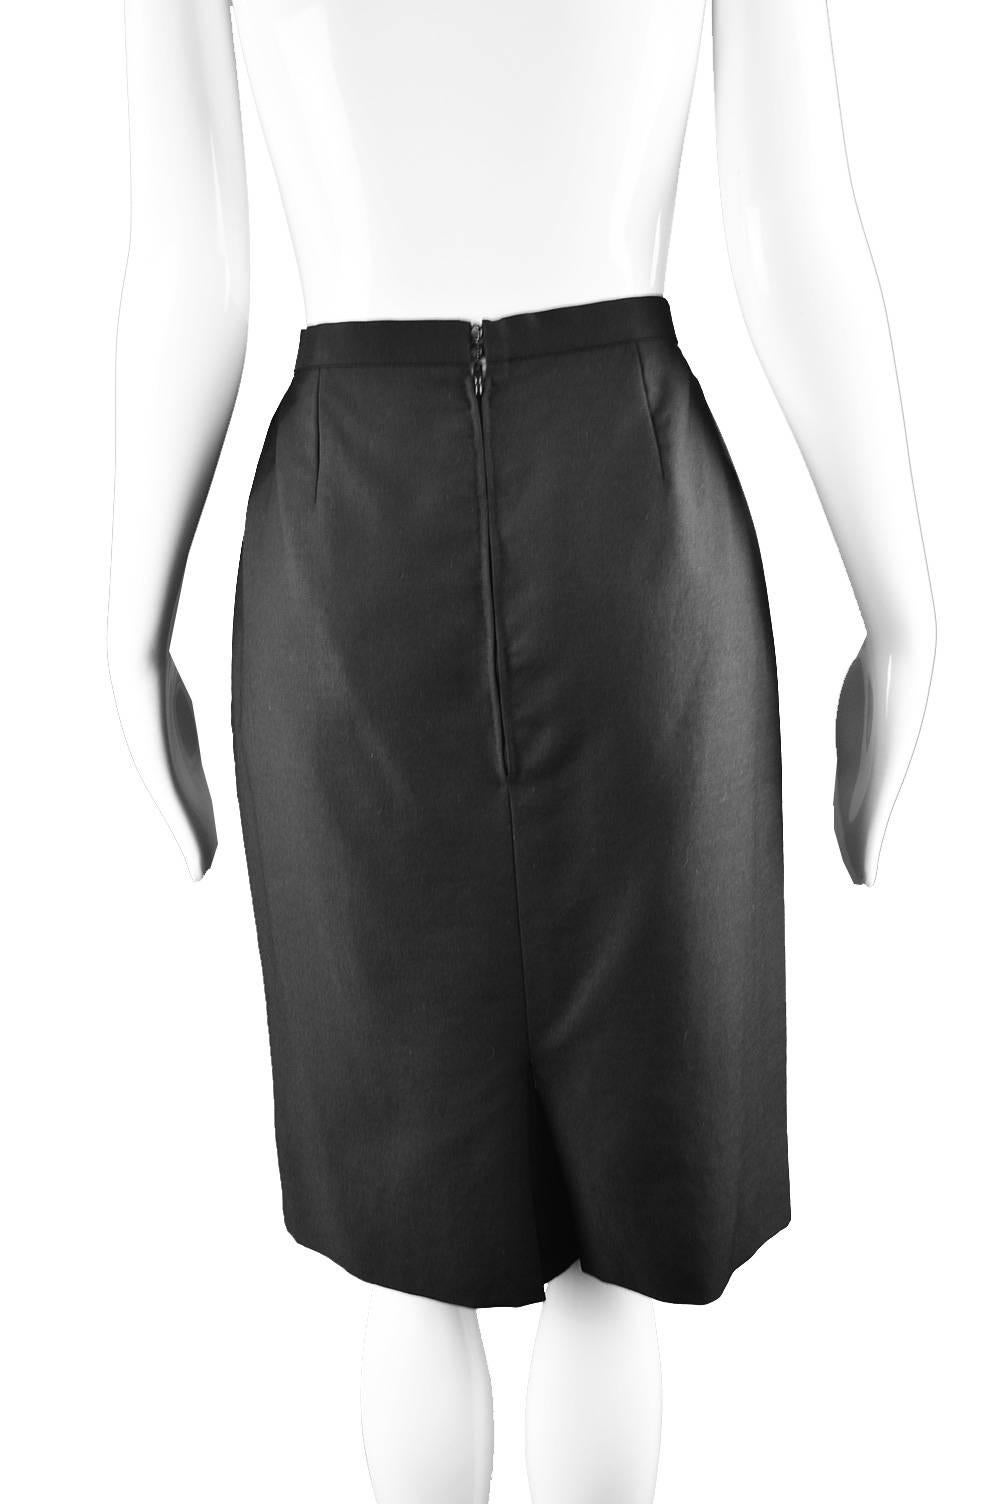 Hardy Amies Couture Vintage Black Hand Tailored Skirt Suit, 1960s 5